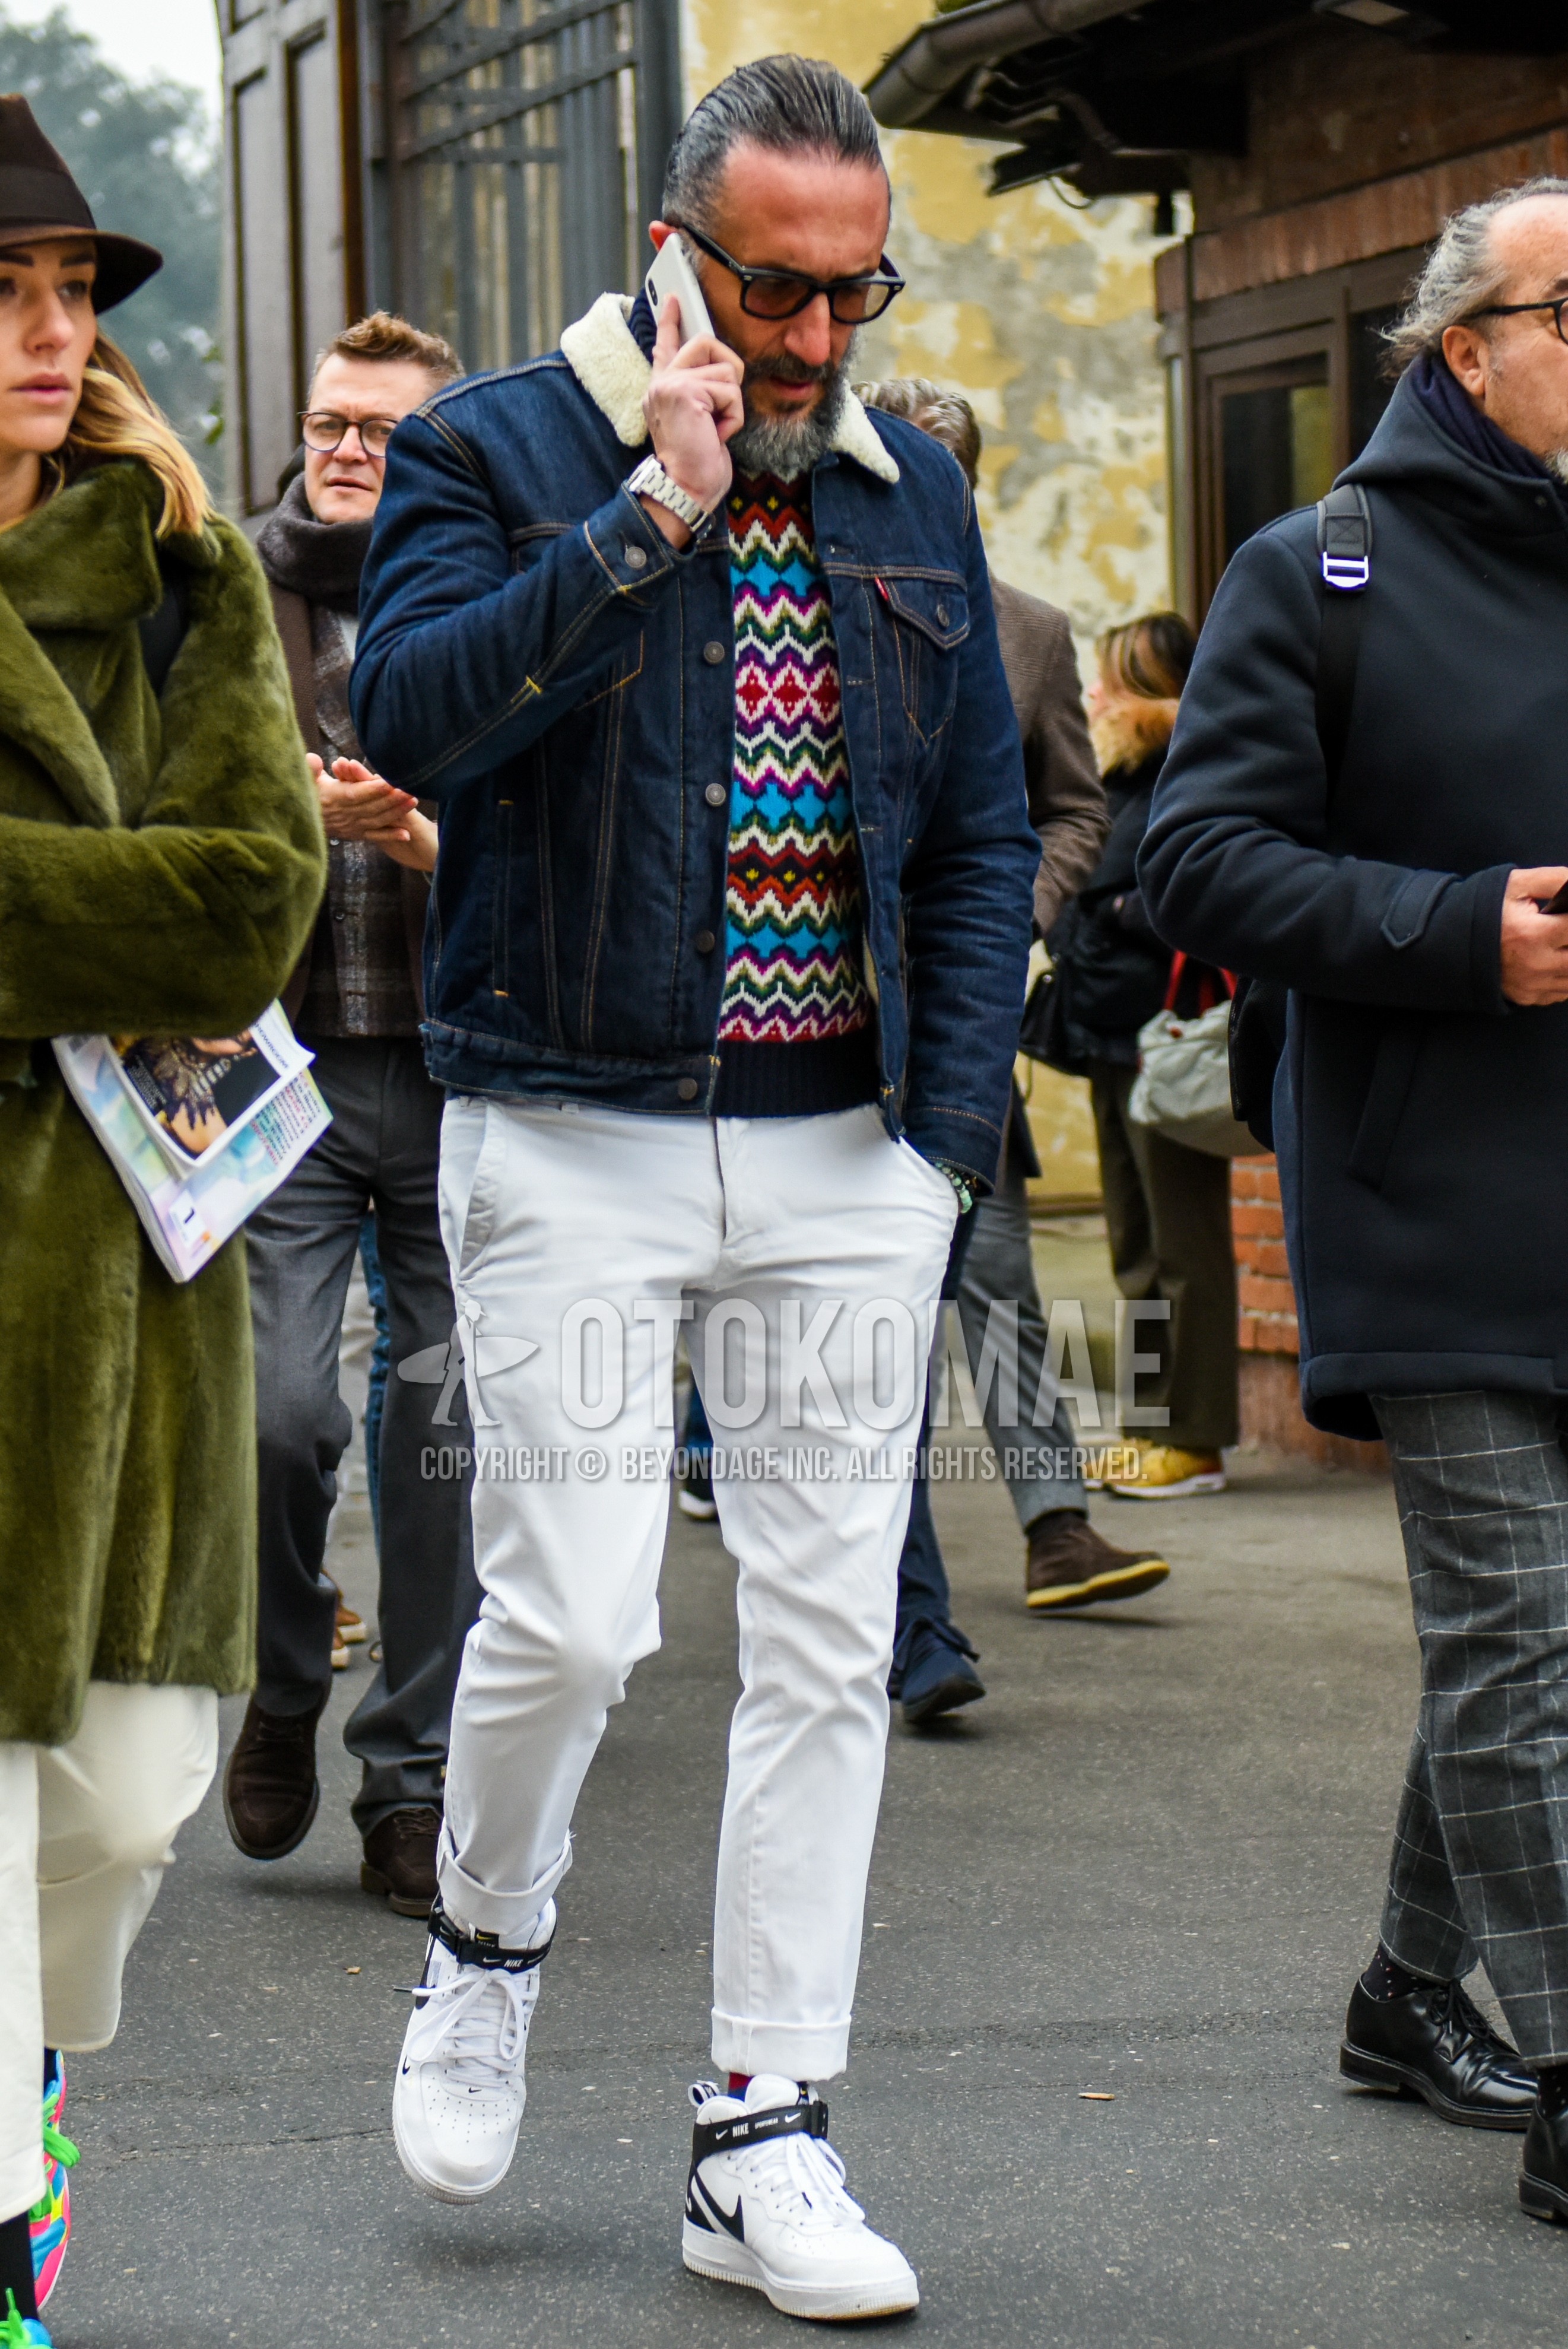 Men's winter outfit with plain sunglasses, navy plain denim jacket, multi-color tops/innerwear sweater, white plain chinos, white high-cut sneakers.